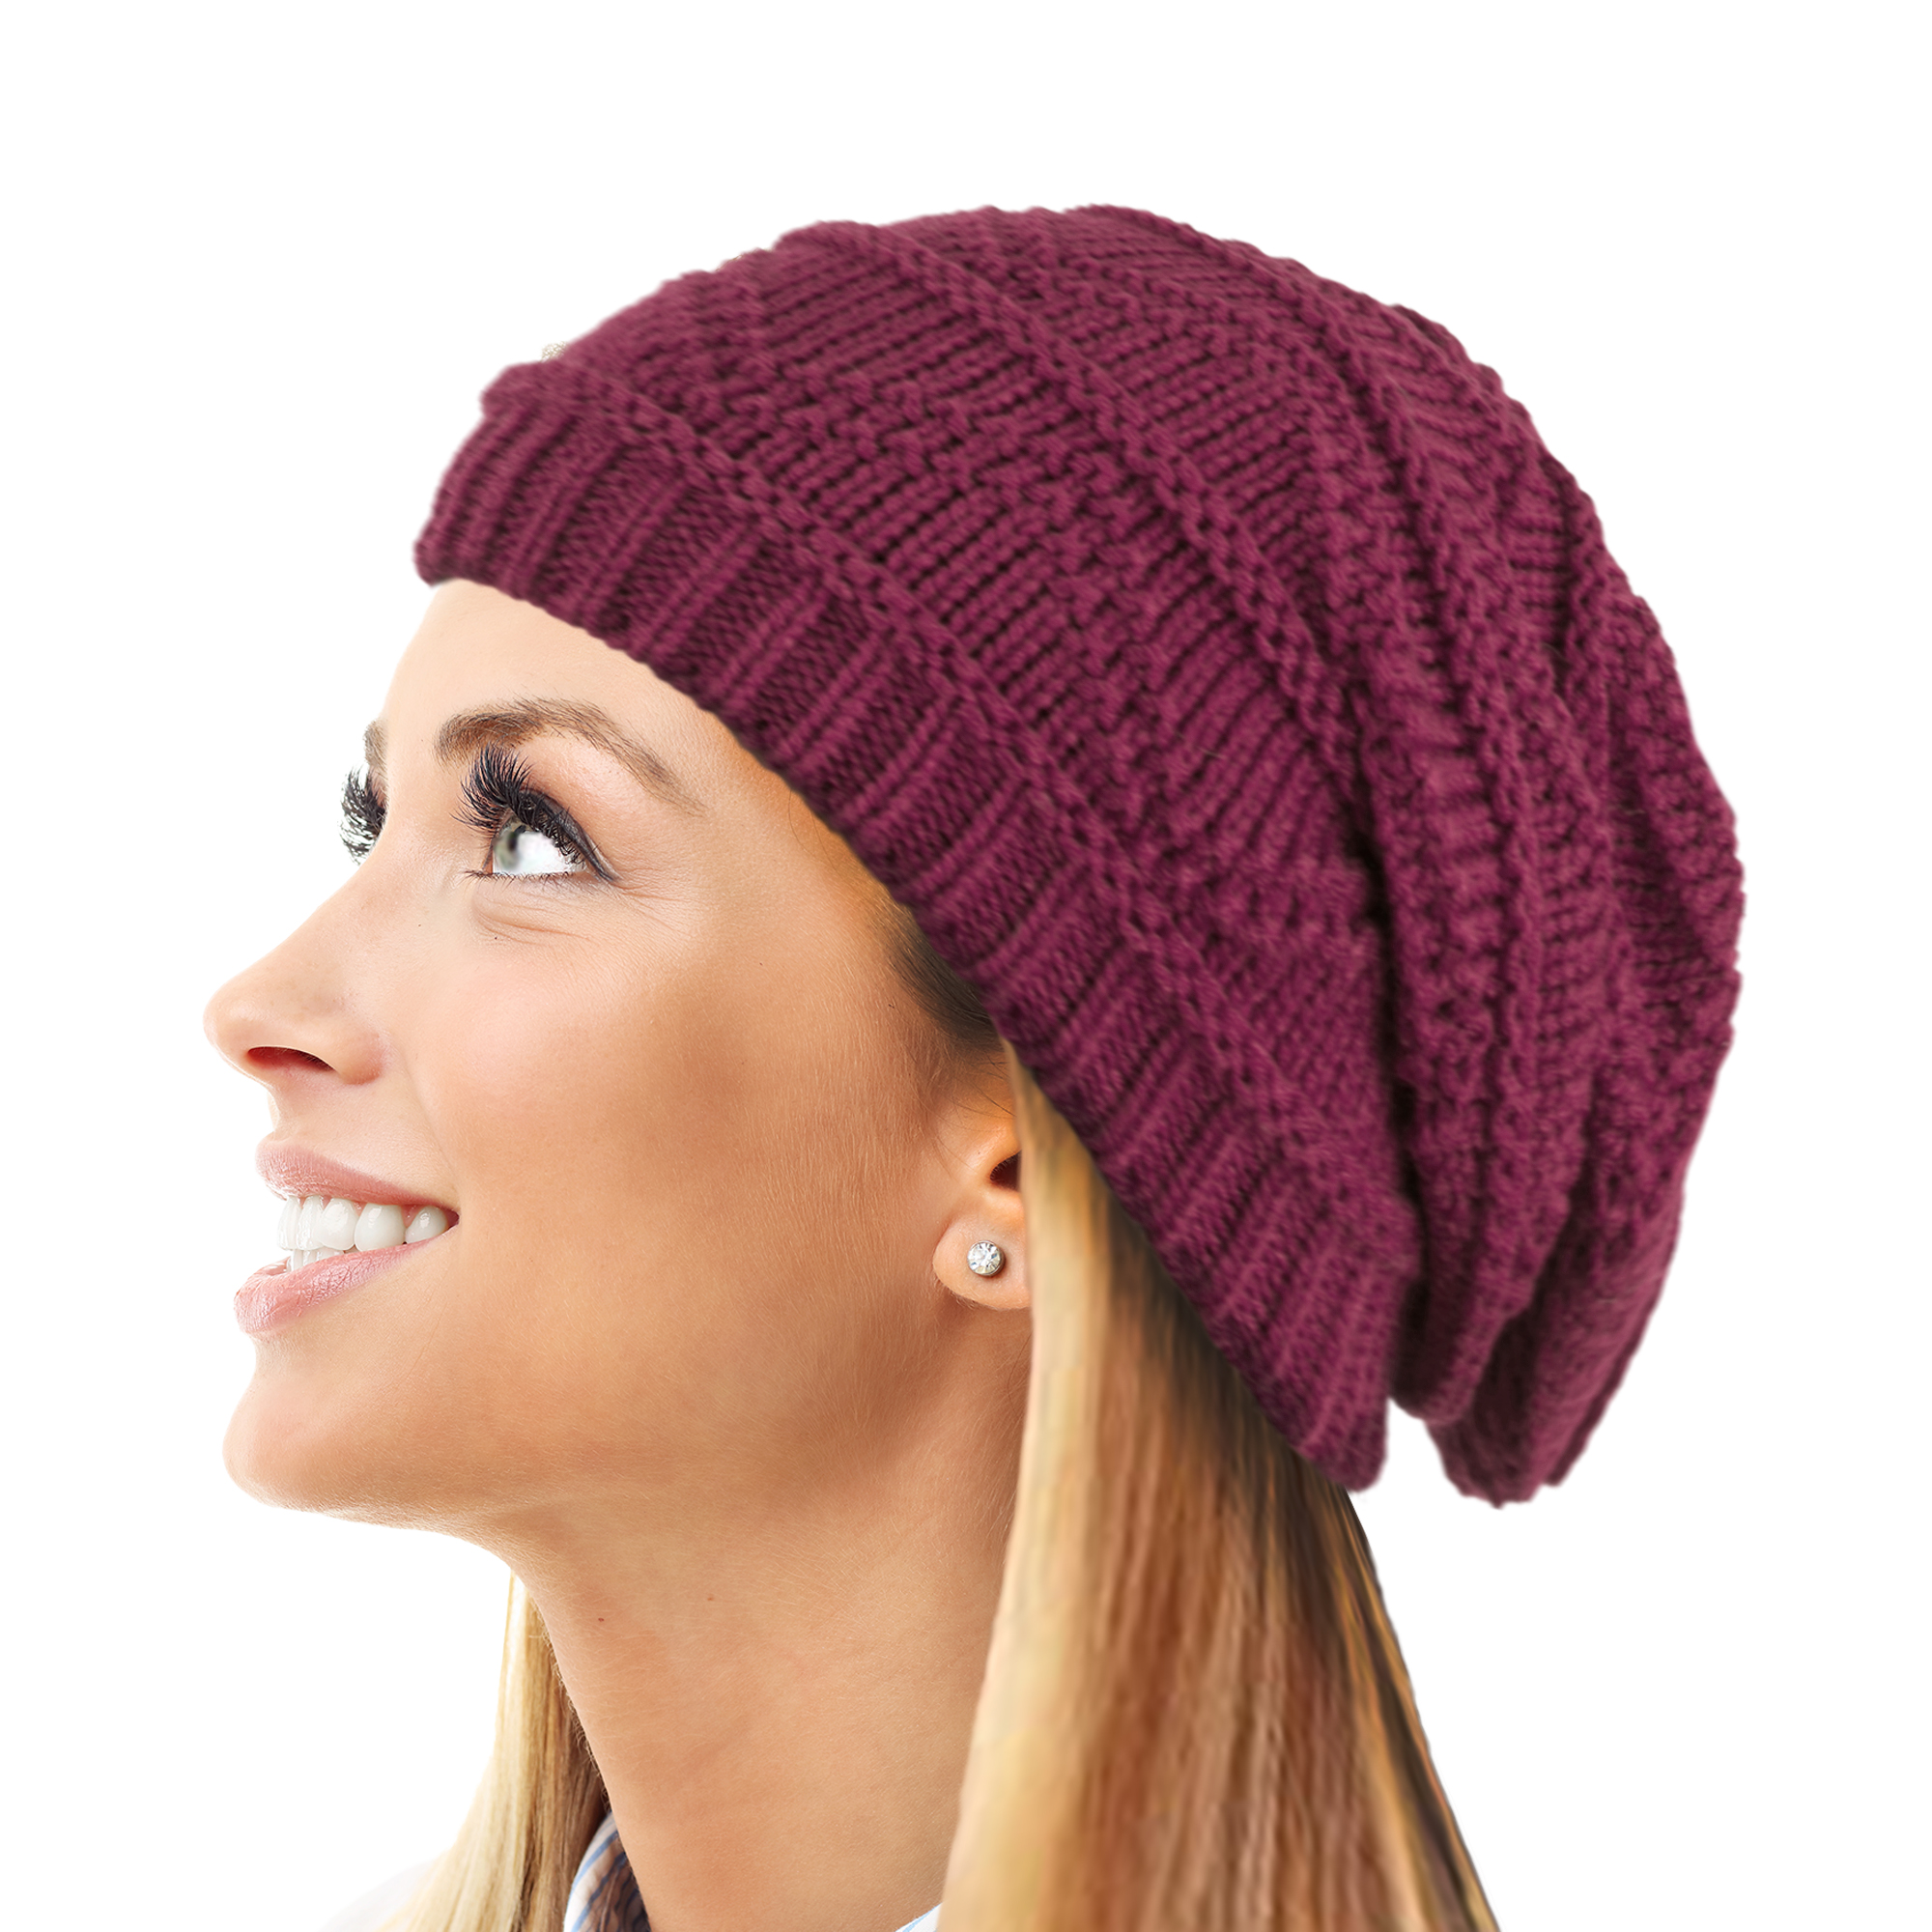 LADIES WOMENS SOFT WARM WINTER KNITTED SLOUCH OVERSIZE LONG FASHION BEANIE  HAT